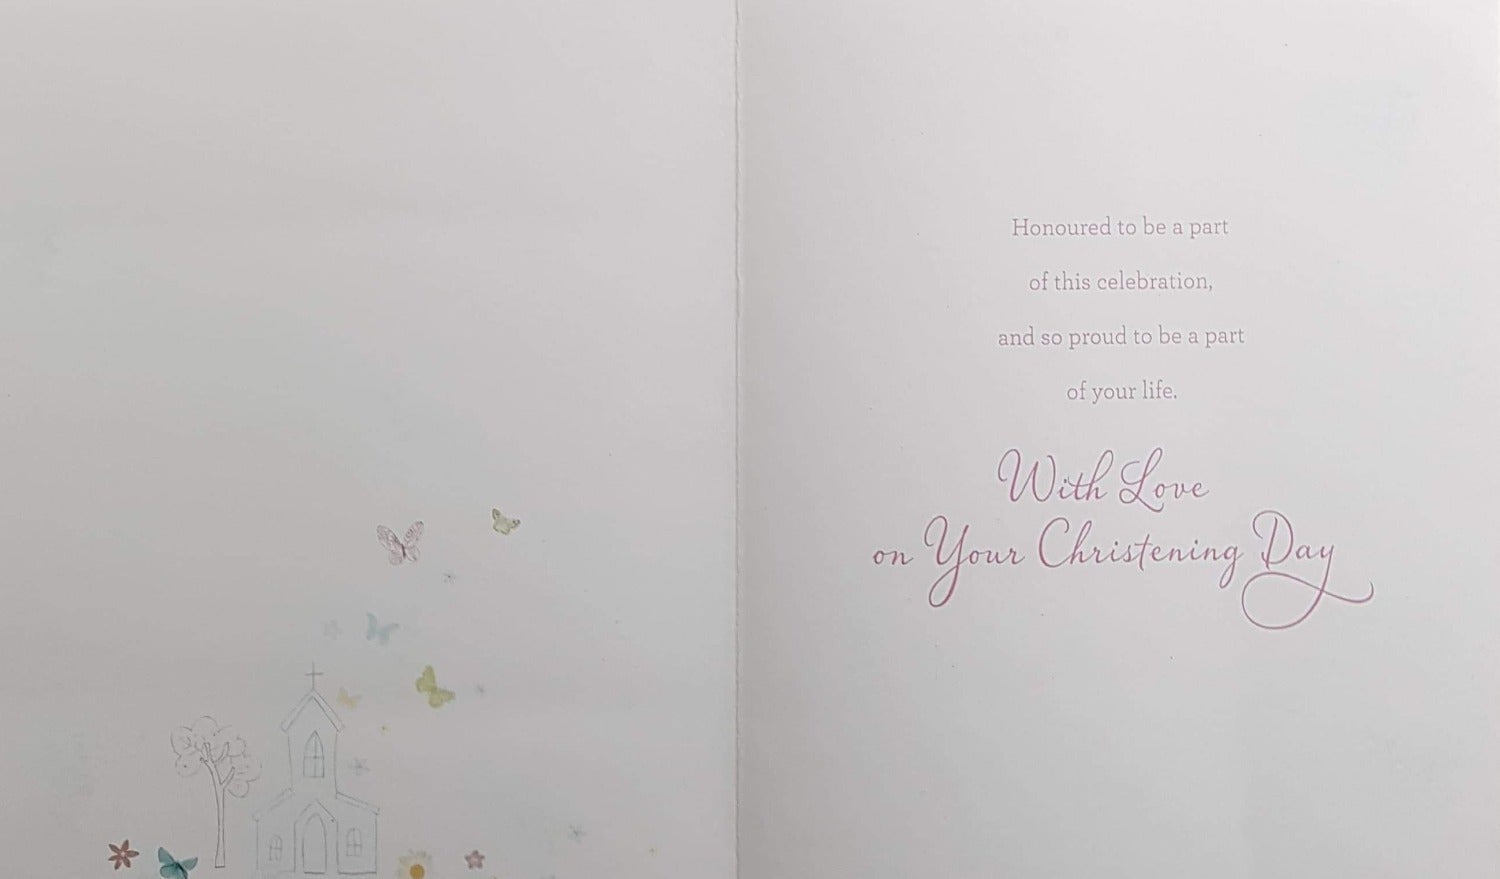 Christening Card - Goddaughter / Butterflies Flying In Circle